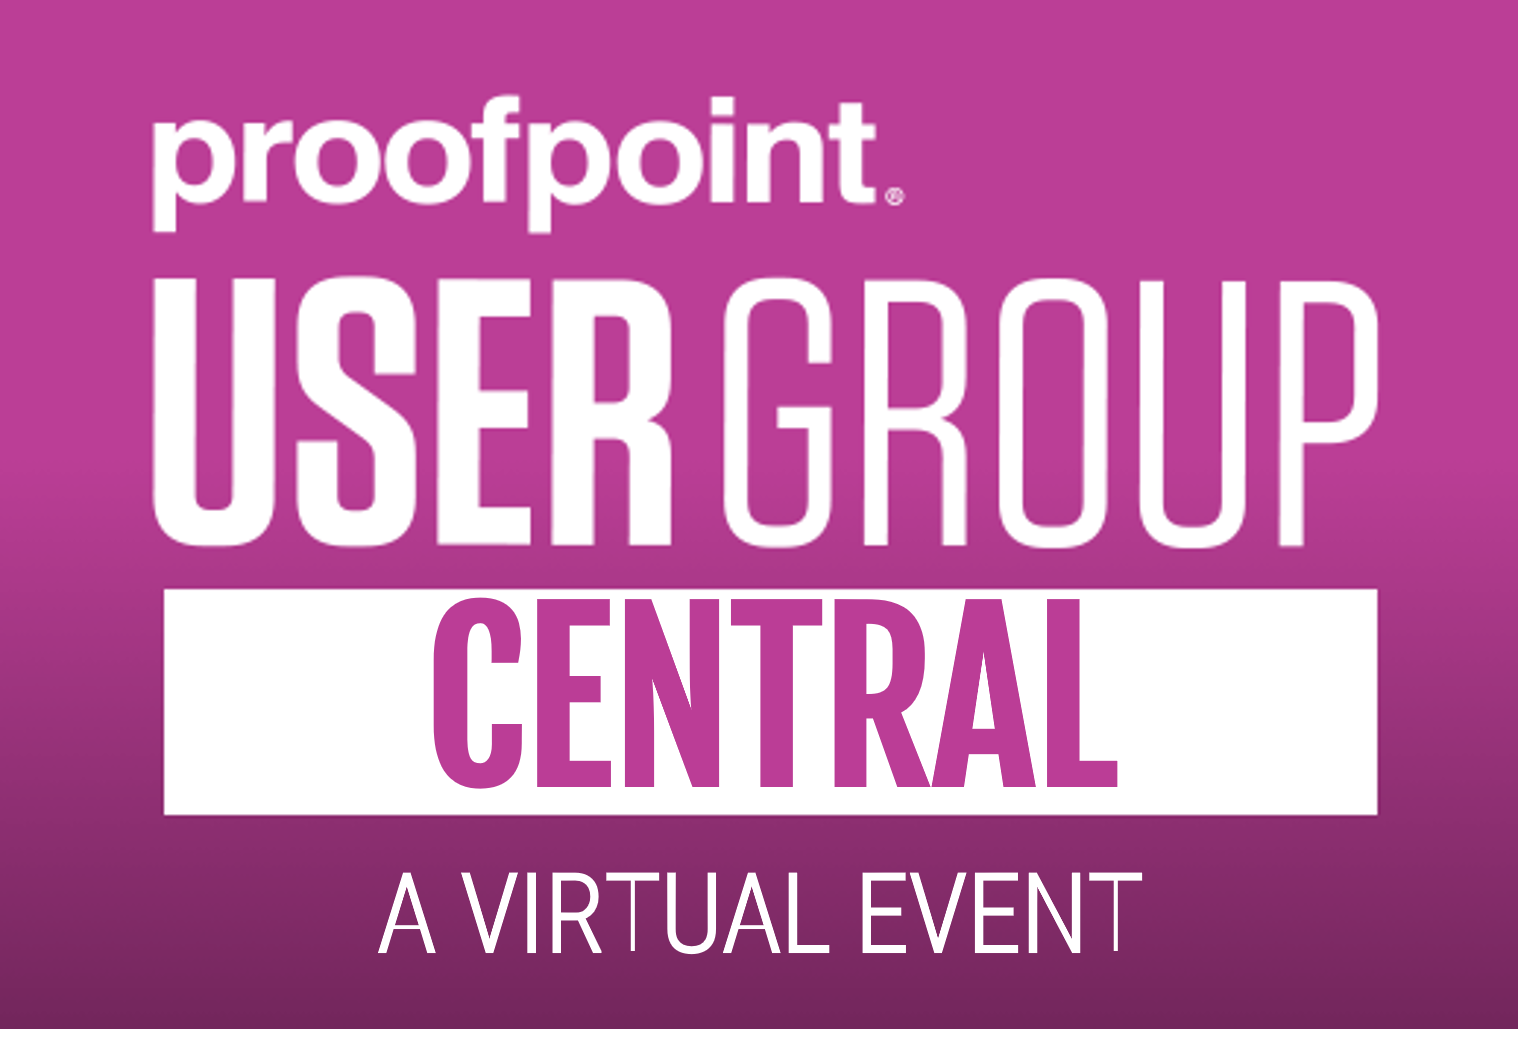 proofpoint User Group